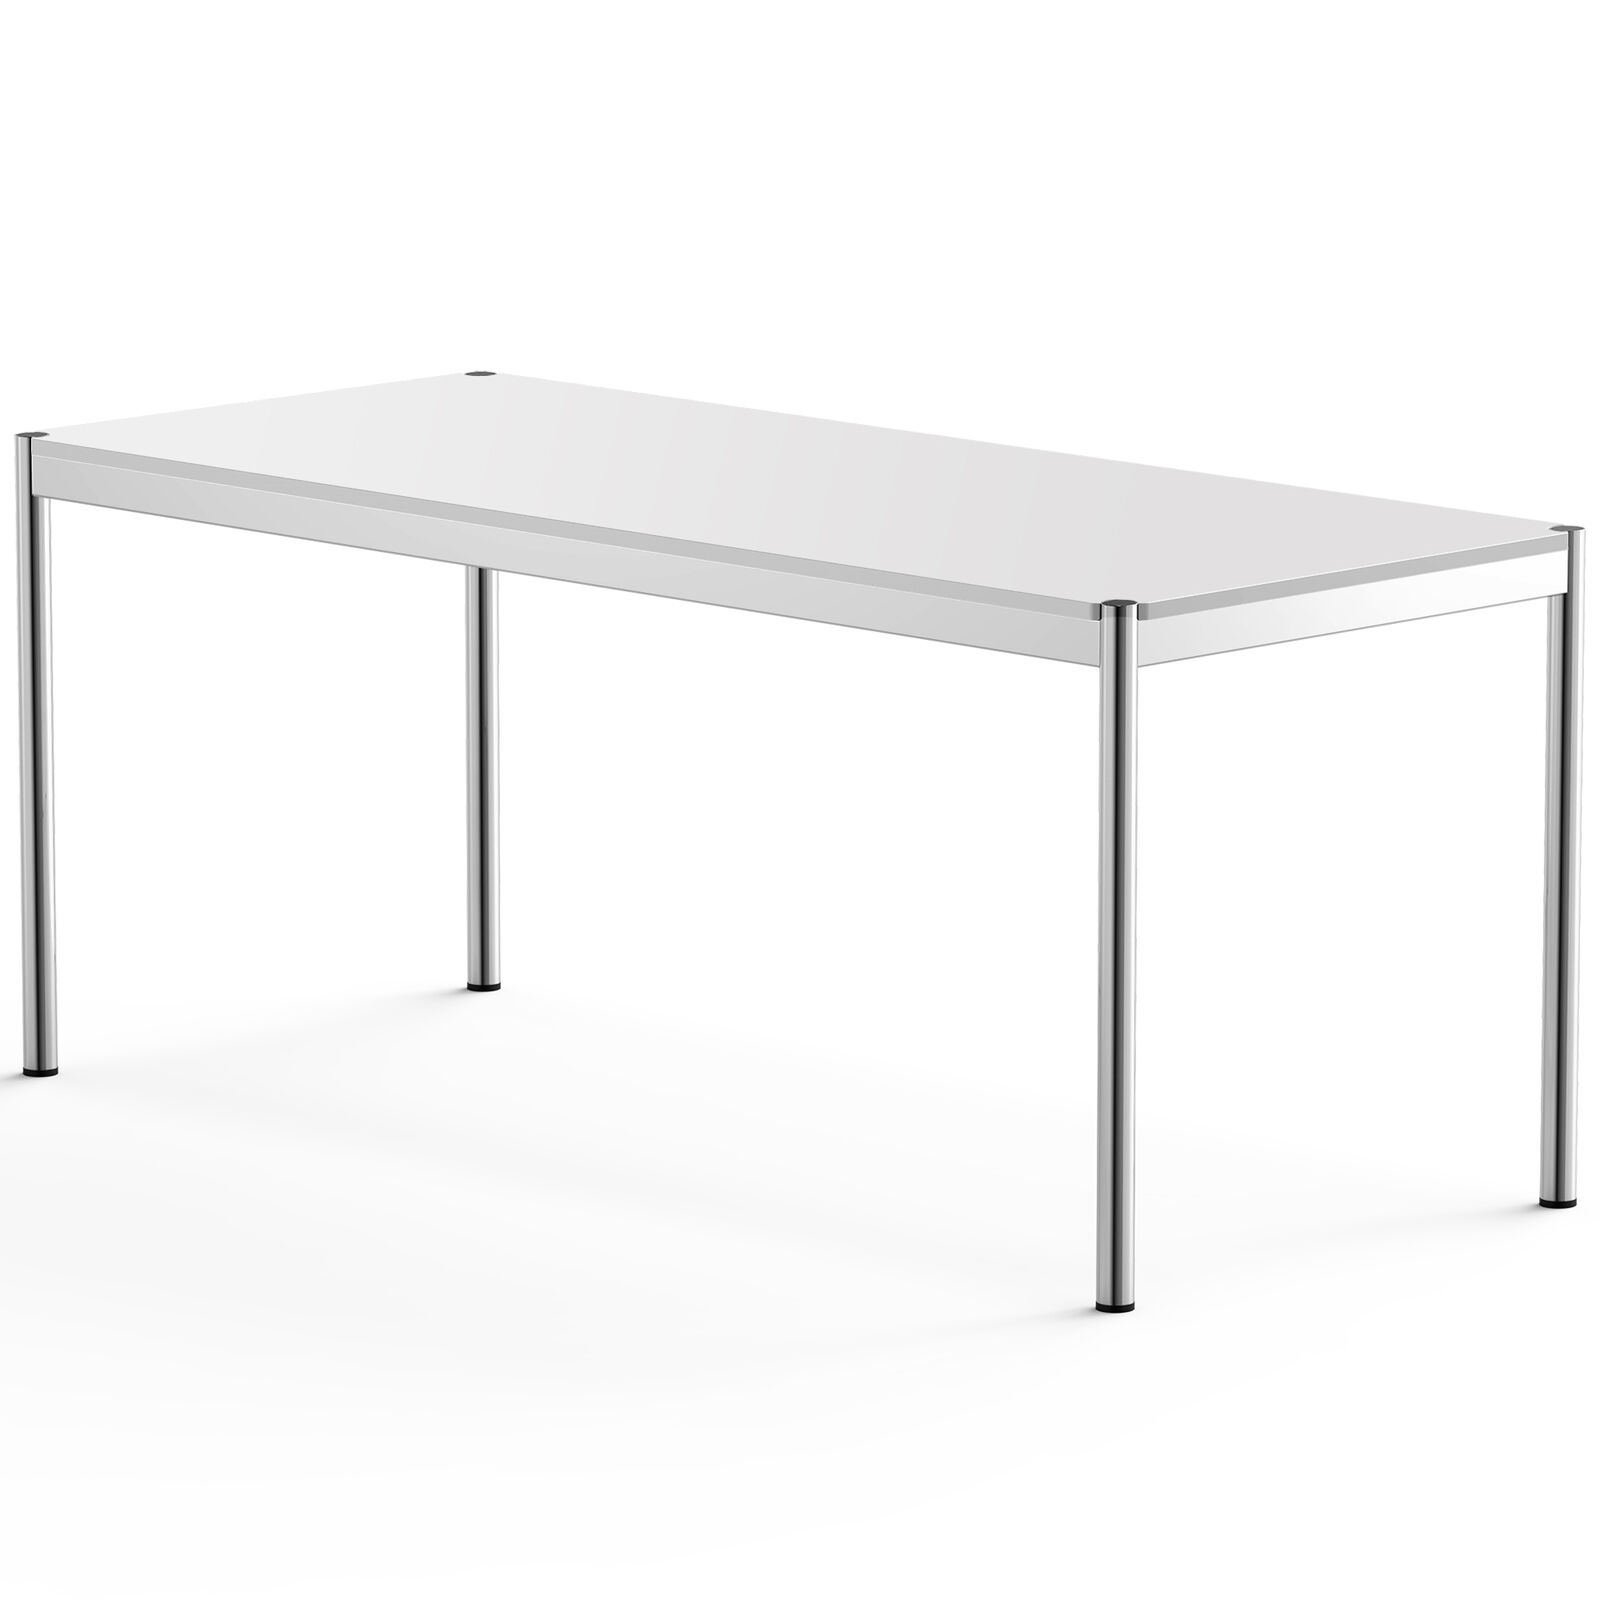 Modern USM Style Table 69 Inch Computer Study Desk Dinning Tables Home Office